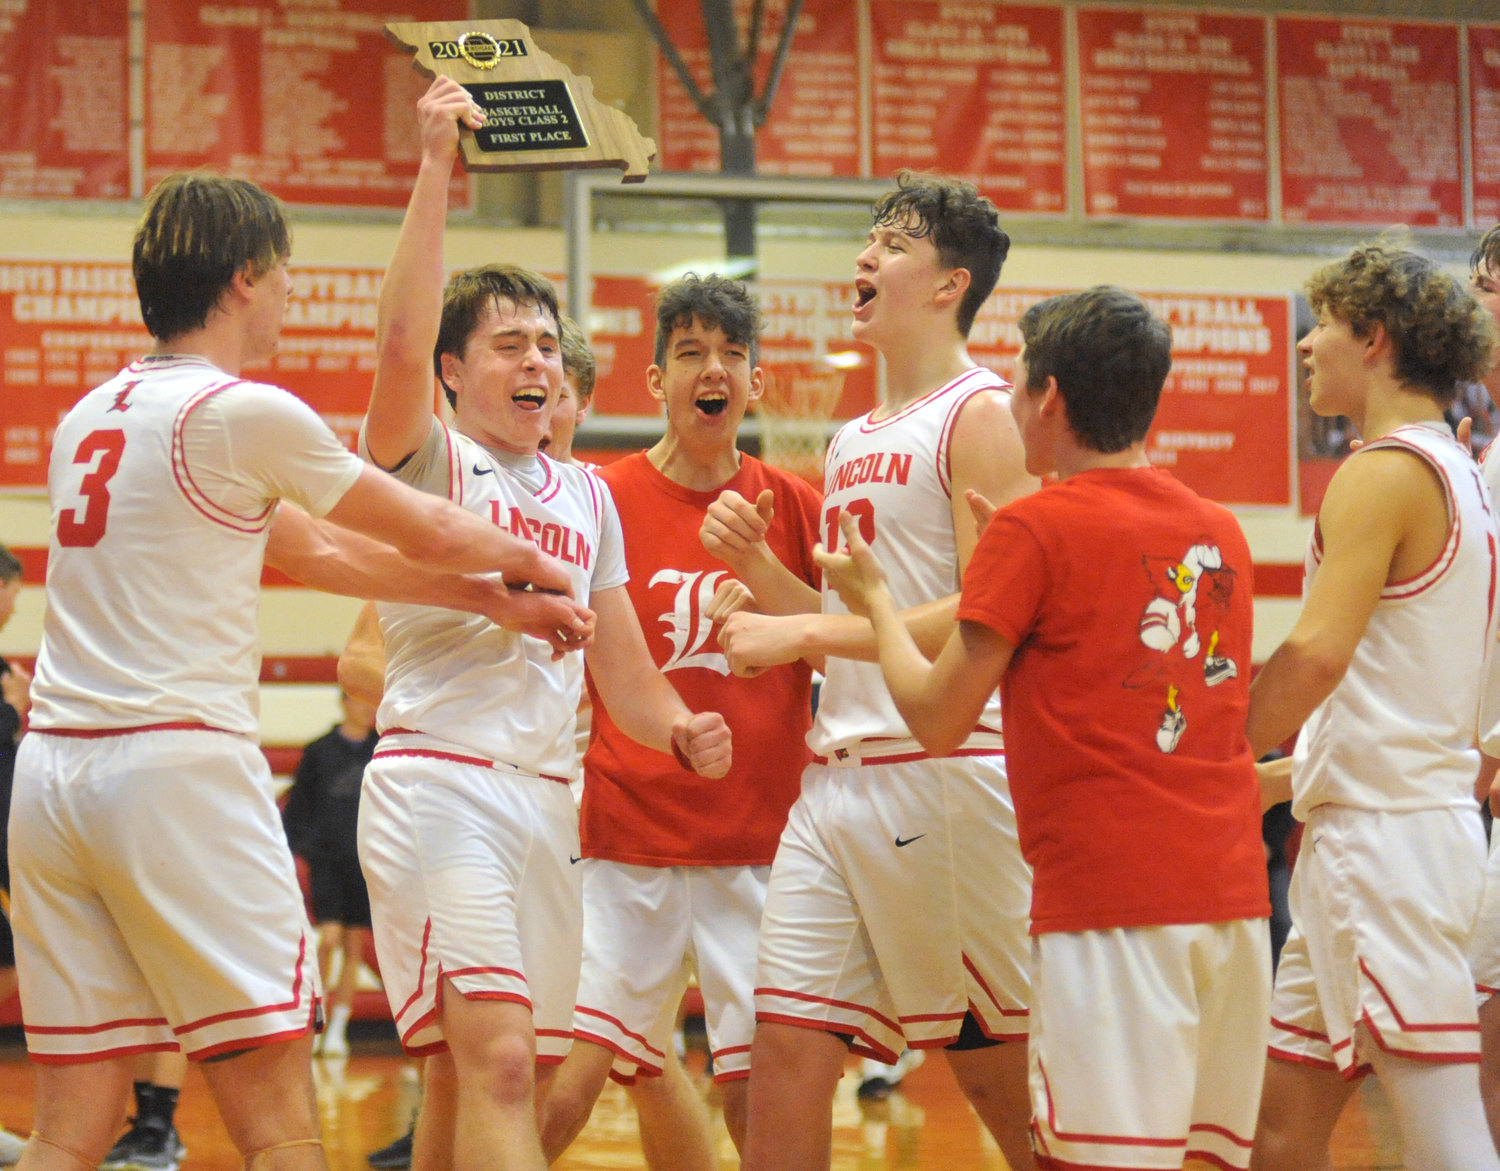 Cardinals senior Devon Parrott holds the district championship plaque Saturday, Feb. 27, 2021, as the team celebrates a 54-52 victory over Smithton at Lincoln R-2 School in Lincoln.